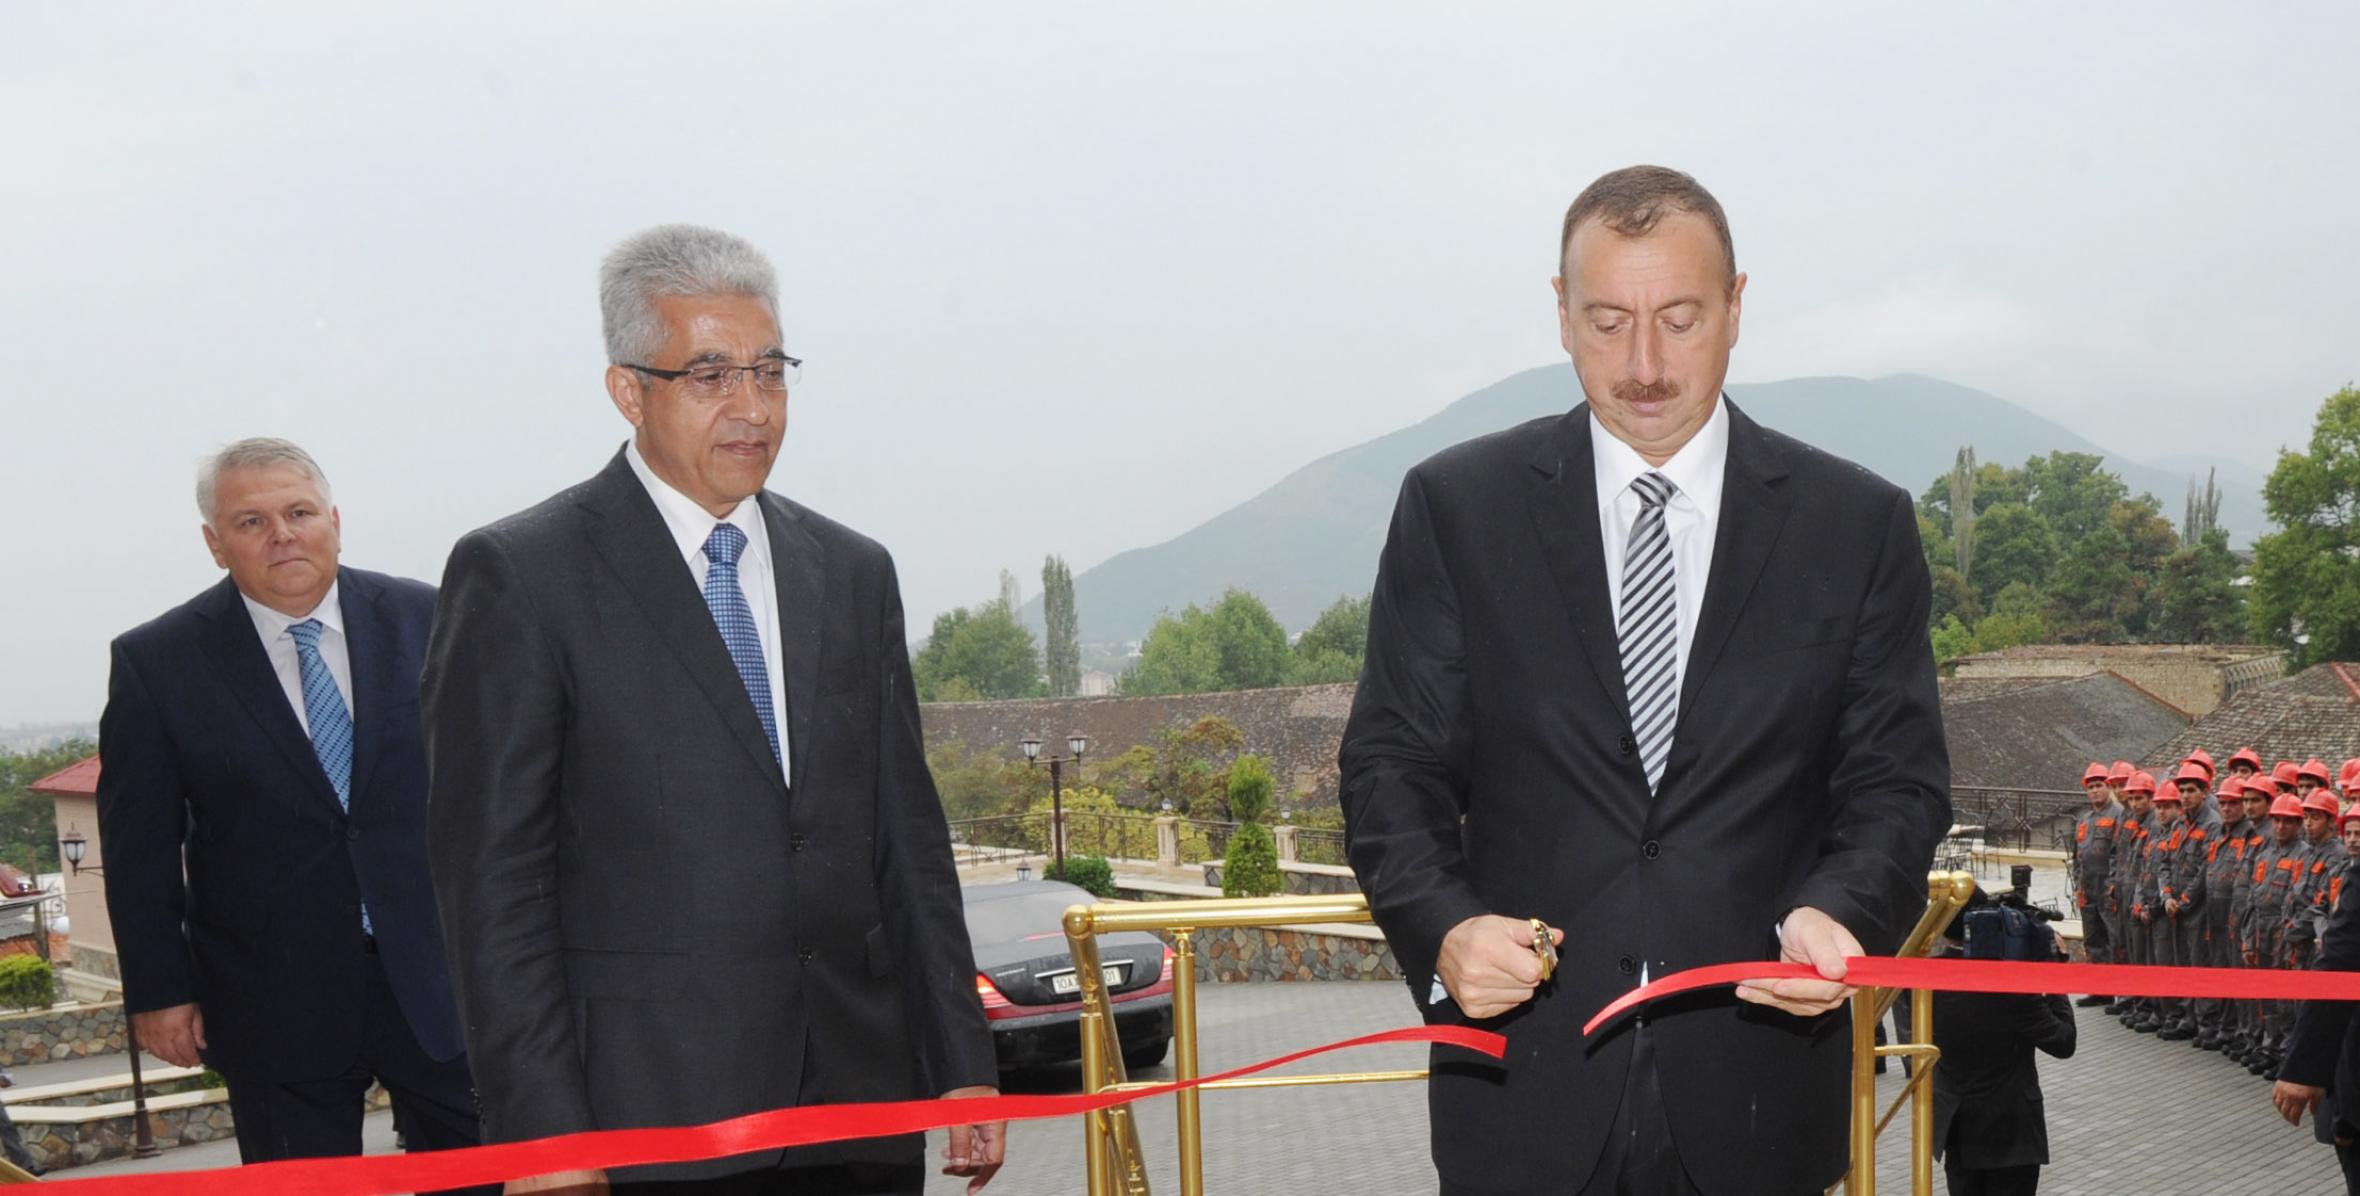 Ilham Aliyev attended the opening of the four-star Shaki Palace hotel